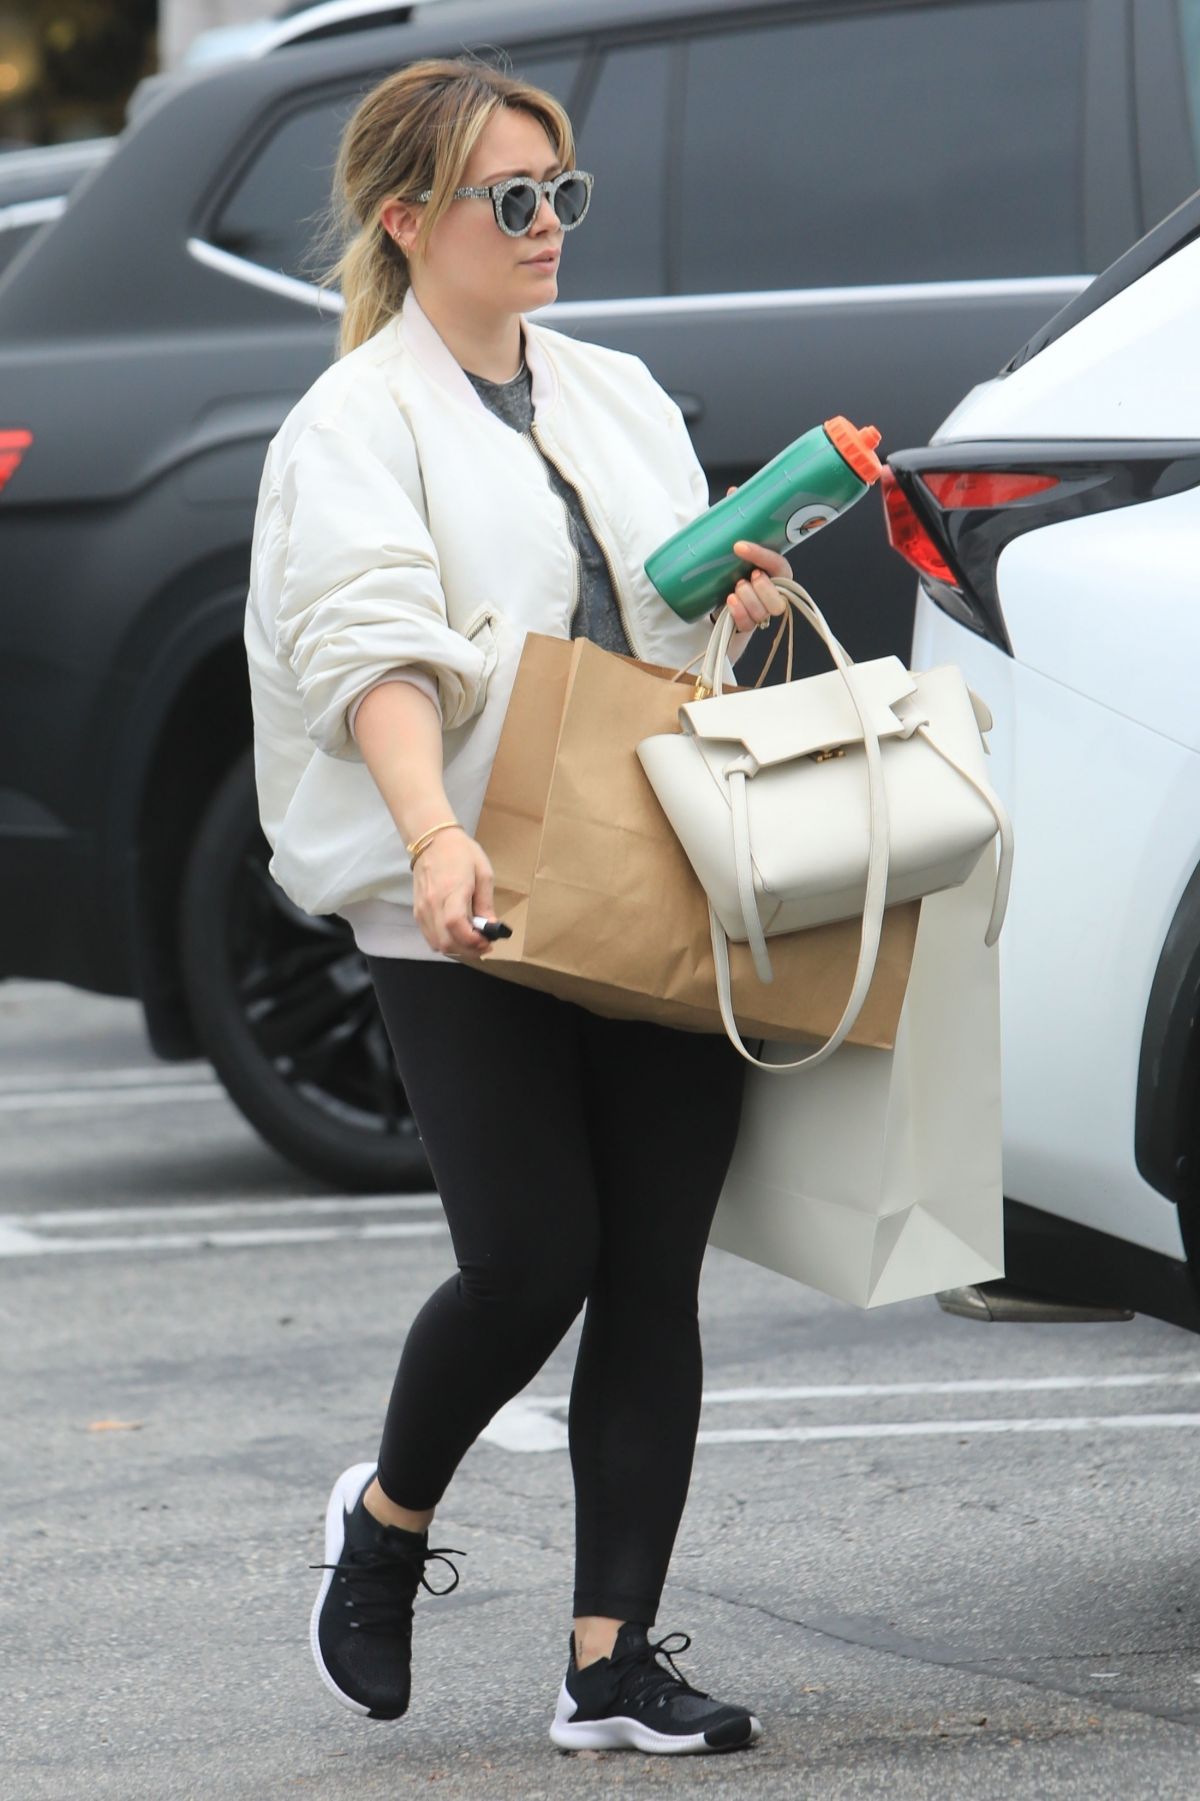 HILARY DUFF Out Shopping in Beverly Hills 06/17/2019 – HawtCelebs